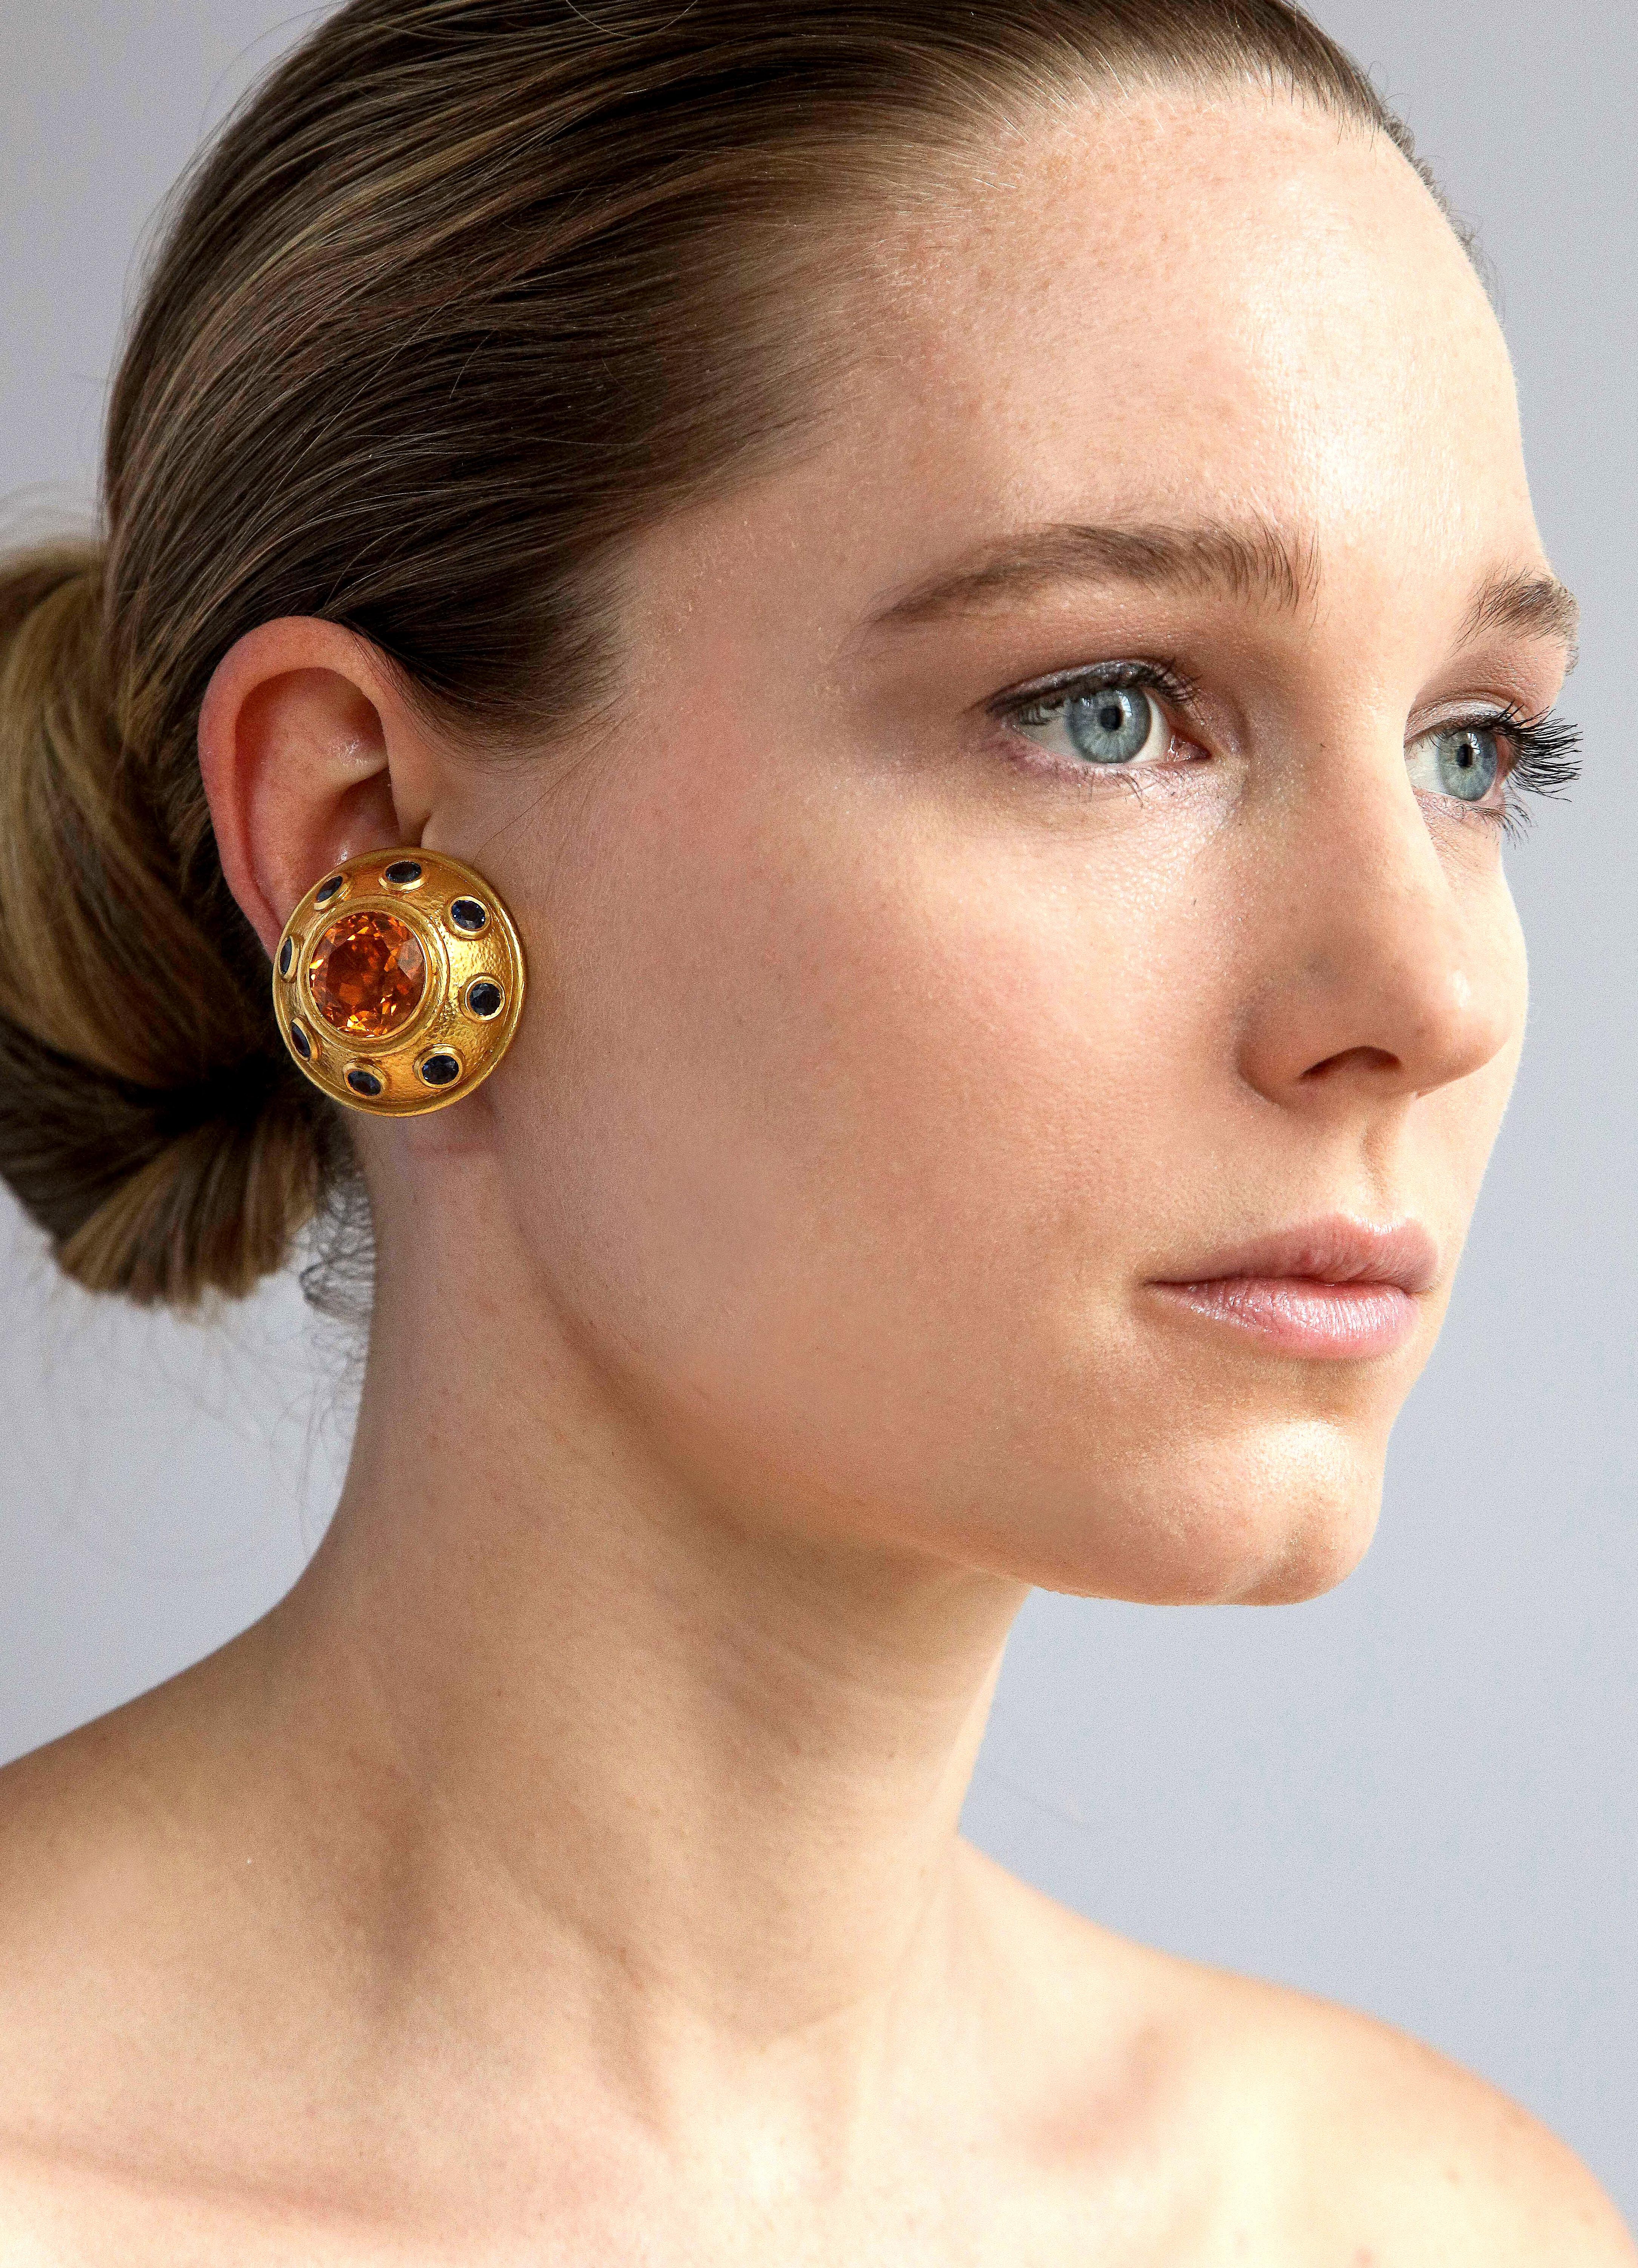 We offer a dramatic pair of Zolotas 22K gold ear clips in a hammered finish set with an impressive golden citrine and ringed in large sapphires. Marked Zolotas and 22K gold. Measuring 1 1/4 inch diameter. Weighing 45.3 grams.